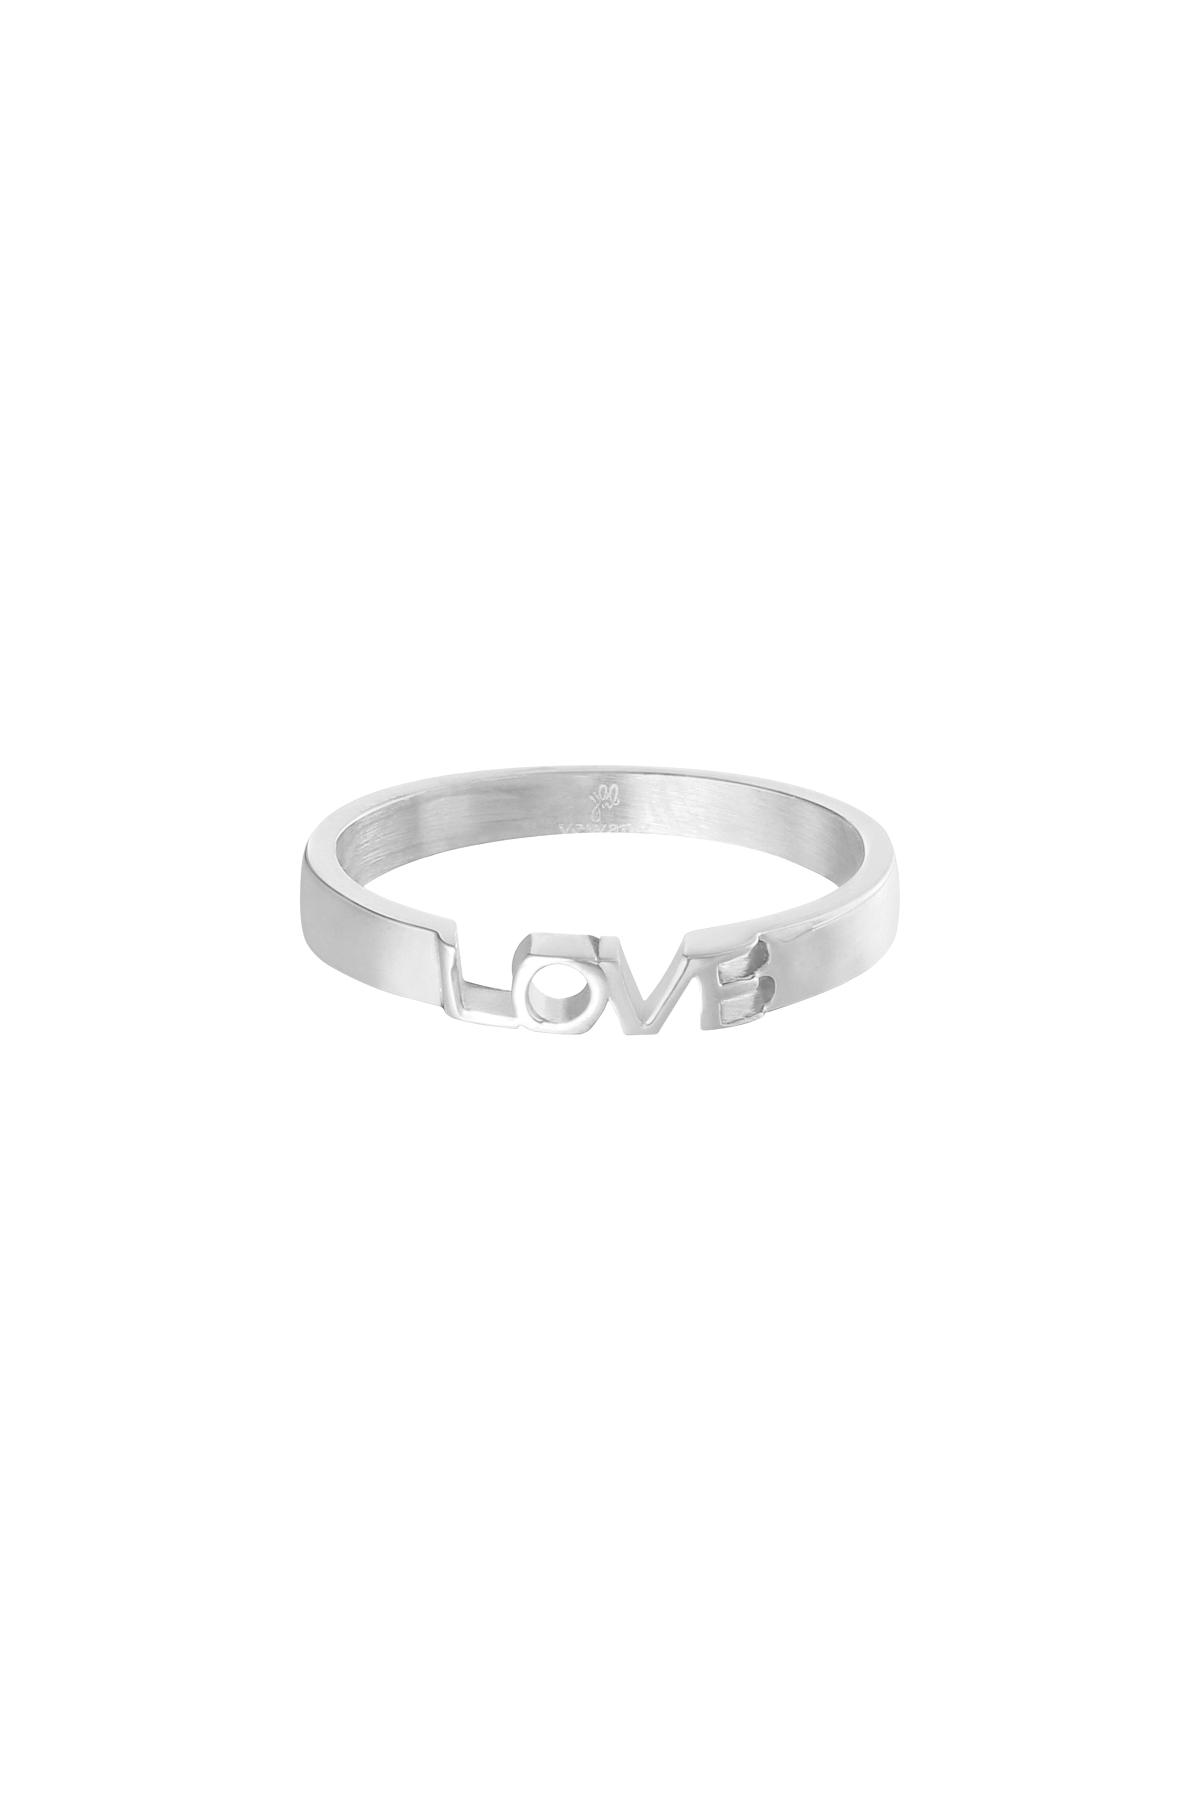 Ring Love Silver Stainless Steel 16 h5 